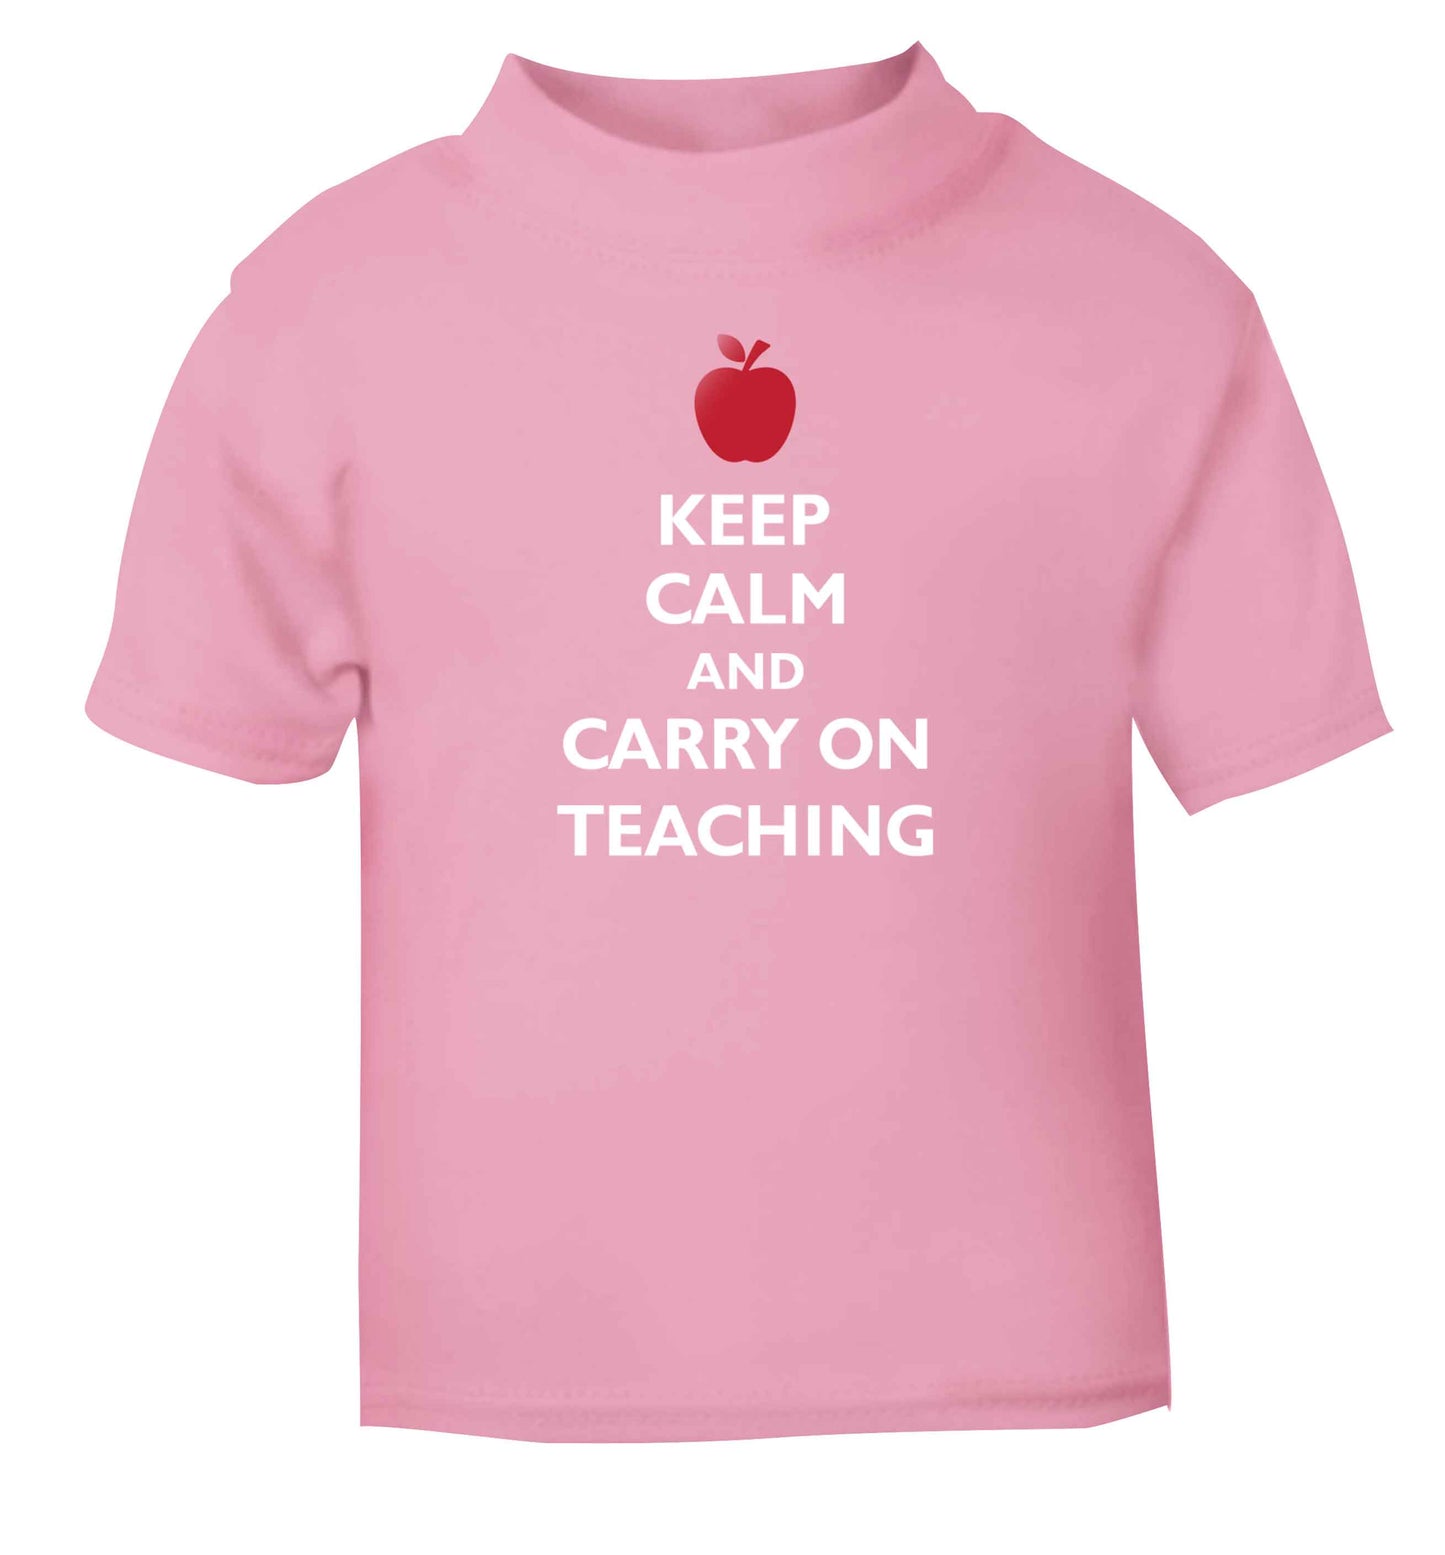 Keep calm and carry on teaching light pink baby toddler Tshirt 2 Years